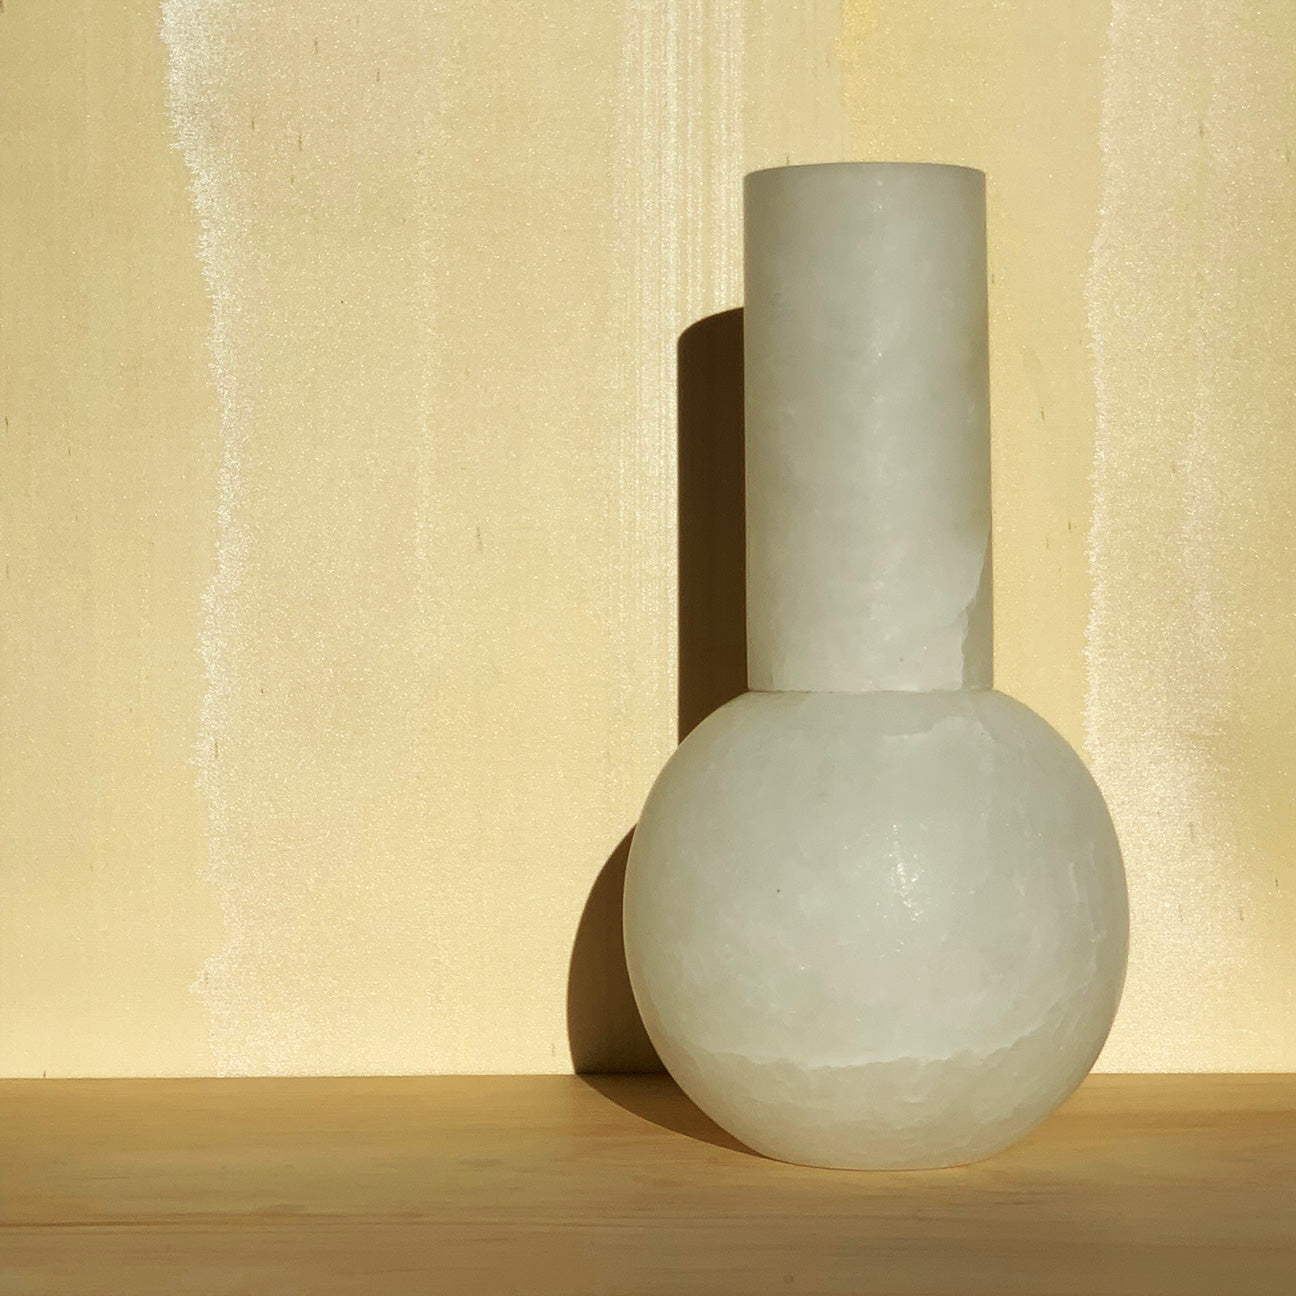 Image of M+A Lolita Vase basking in the early evening light and sitting in front of wallpaper by Fromental Design